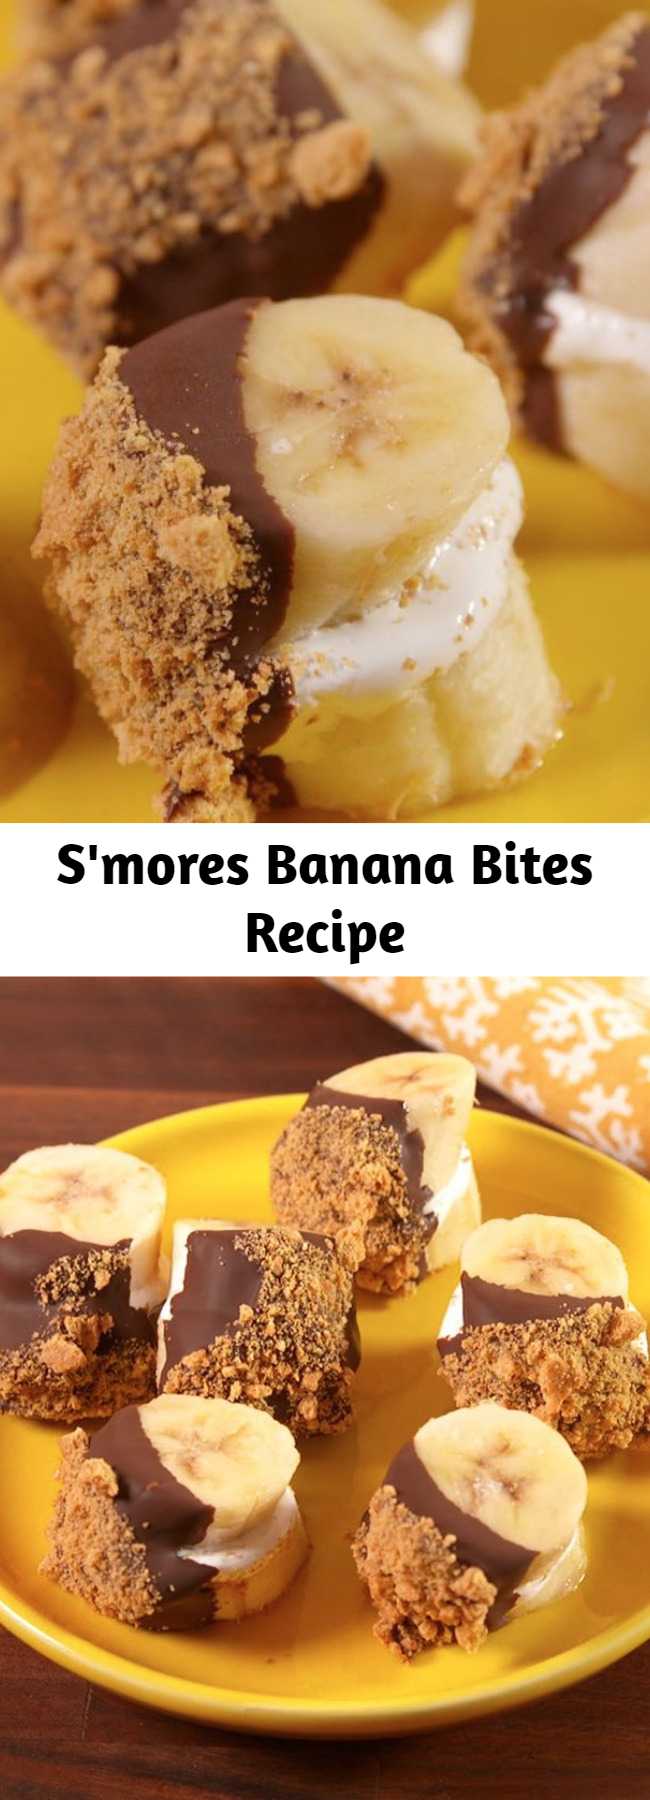 S'mores Banana Bites Recipe - Looking for a fun, healthy snack? These S’mores Banana Bites are the best! This recipe is easily double, tripled, or quadrupled depending on how many you're serving!